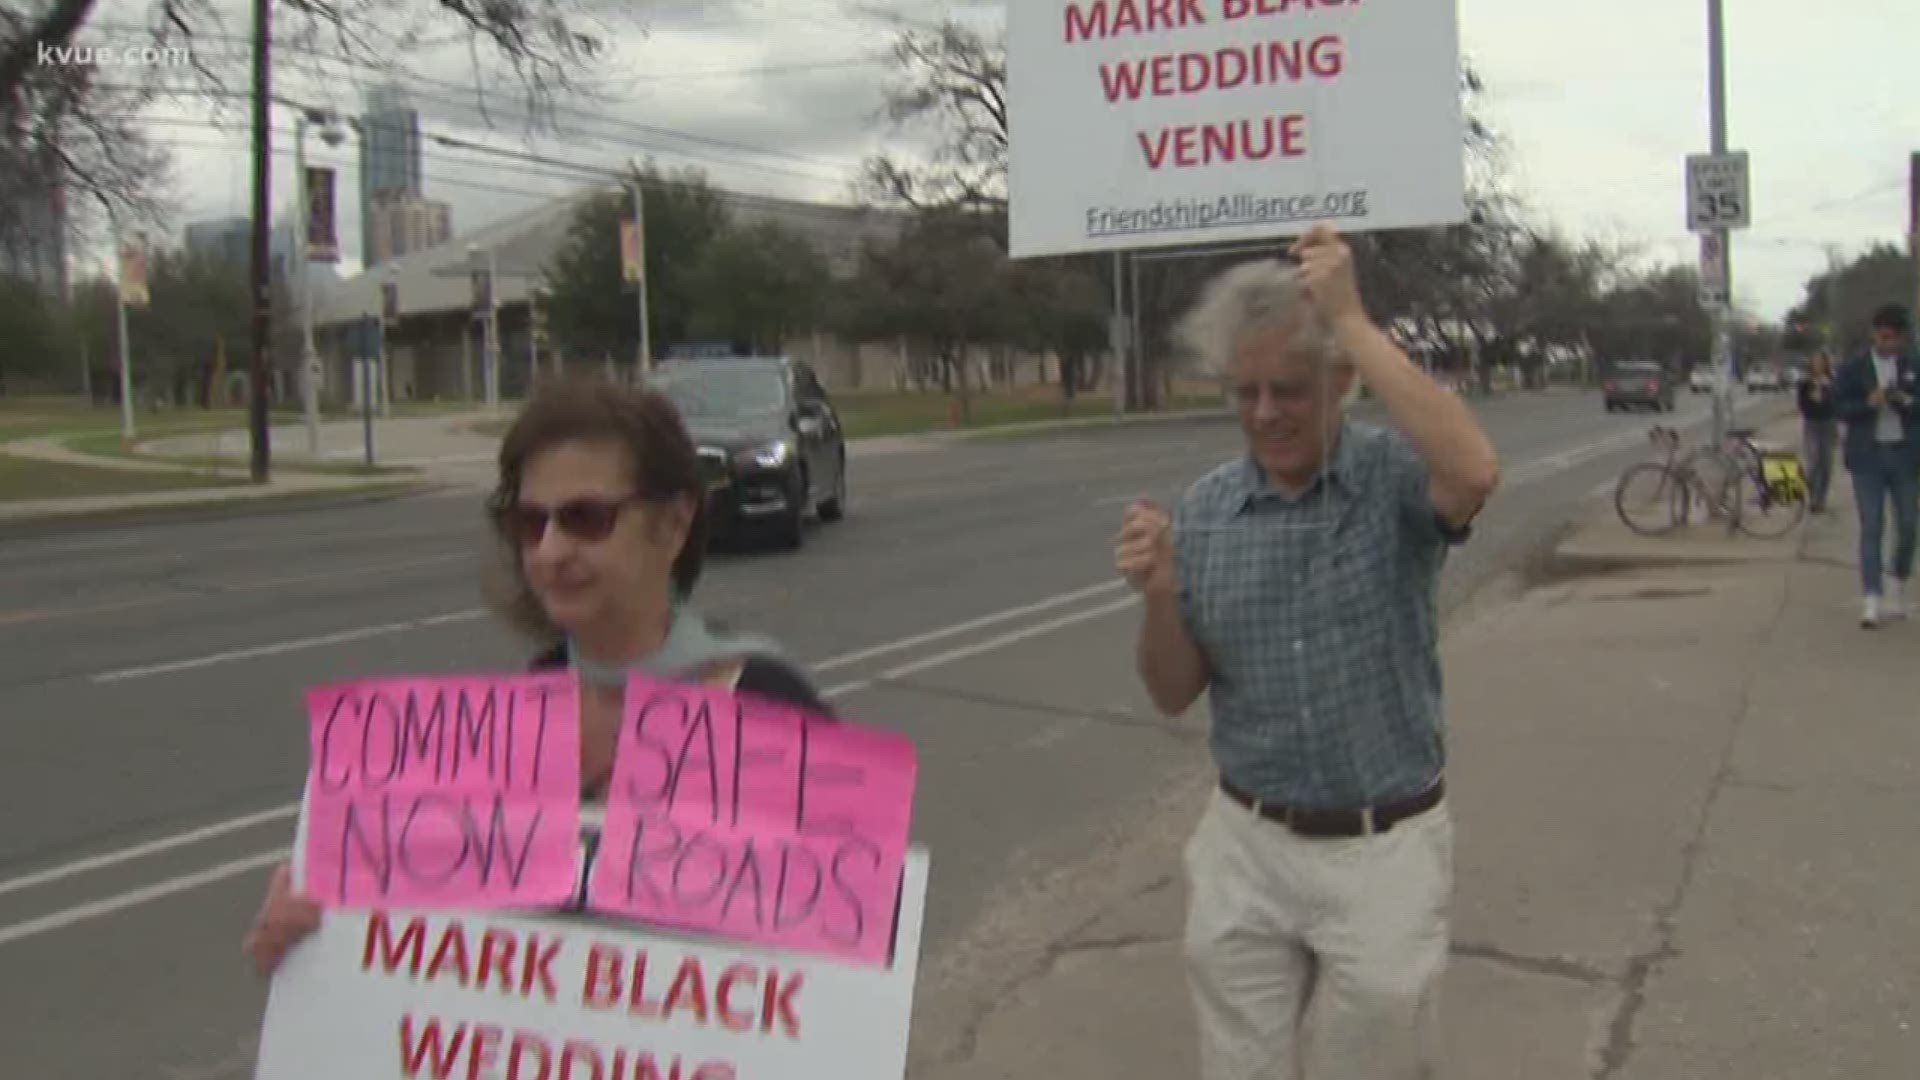 Some neighbors in Dripping Springs are not feeling the love for Terry Black's Barbecue's proposed wedding venue.